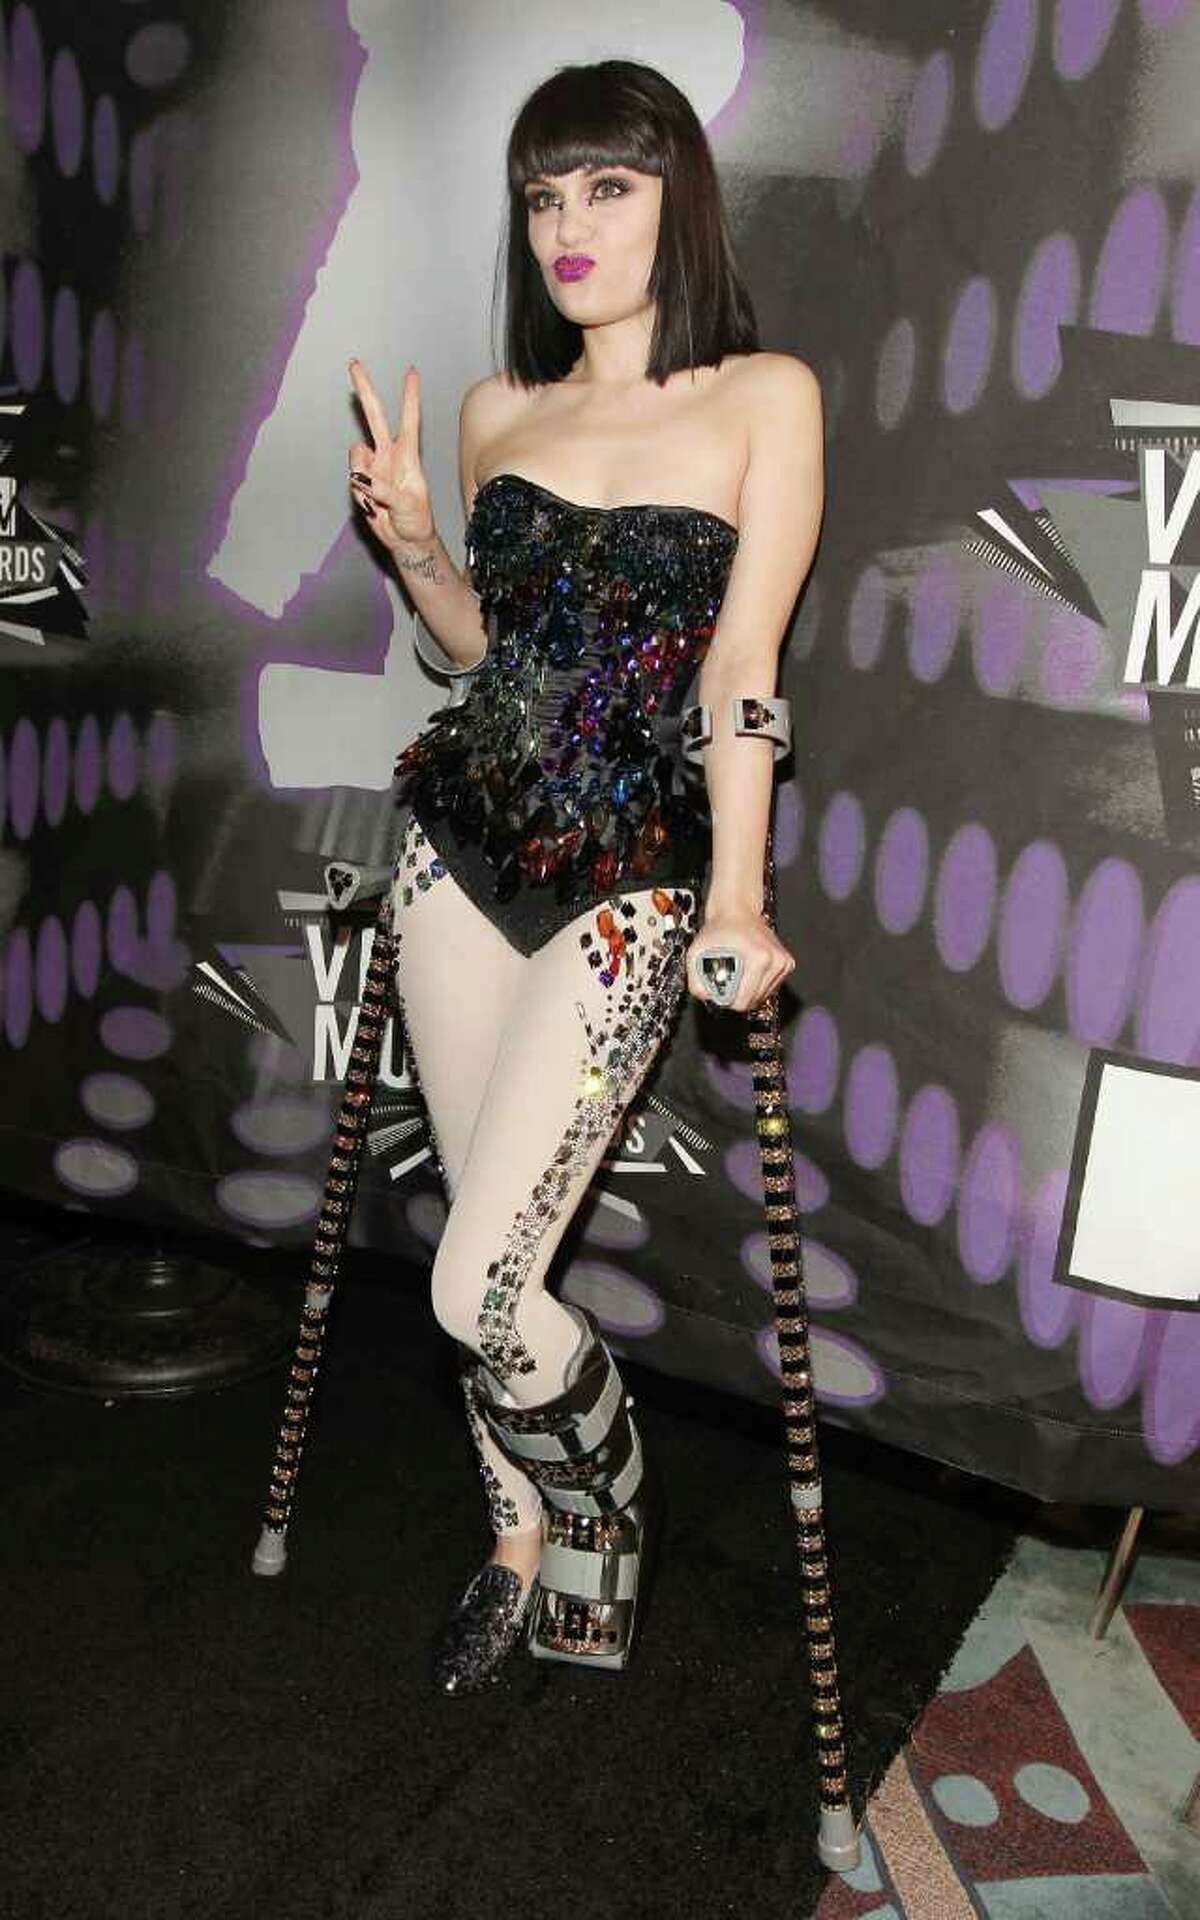 Even though singer Jessie J broke her leg, she still showed up to perform at the VMAs, rocking a sparkling leotard and colorful crutches.